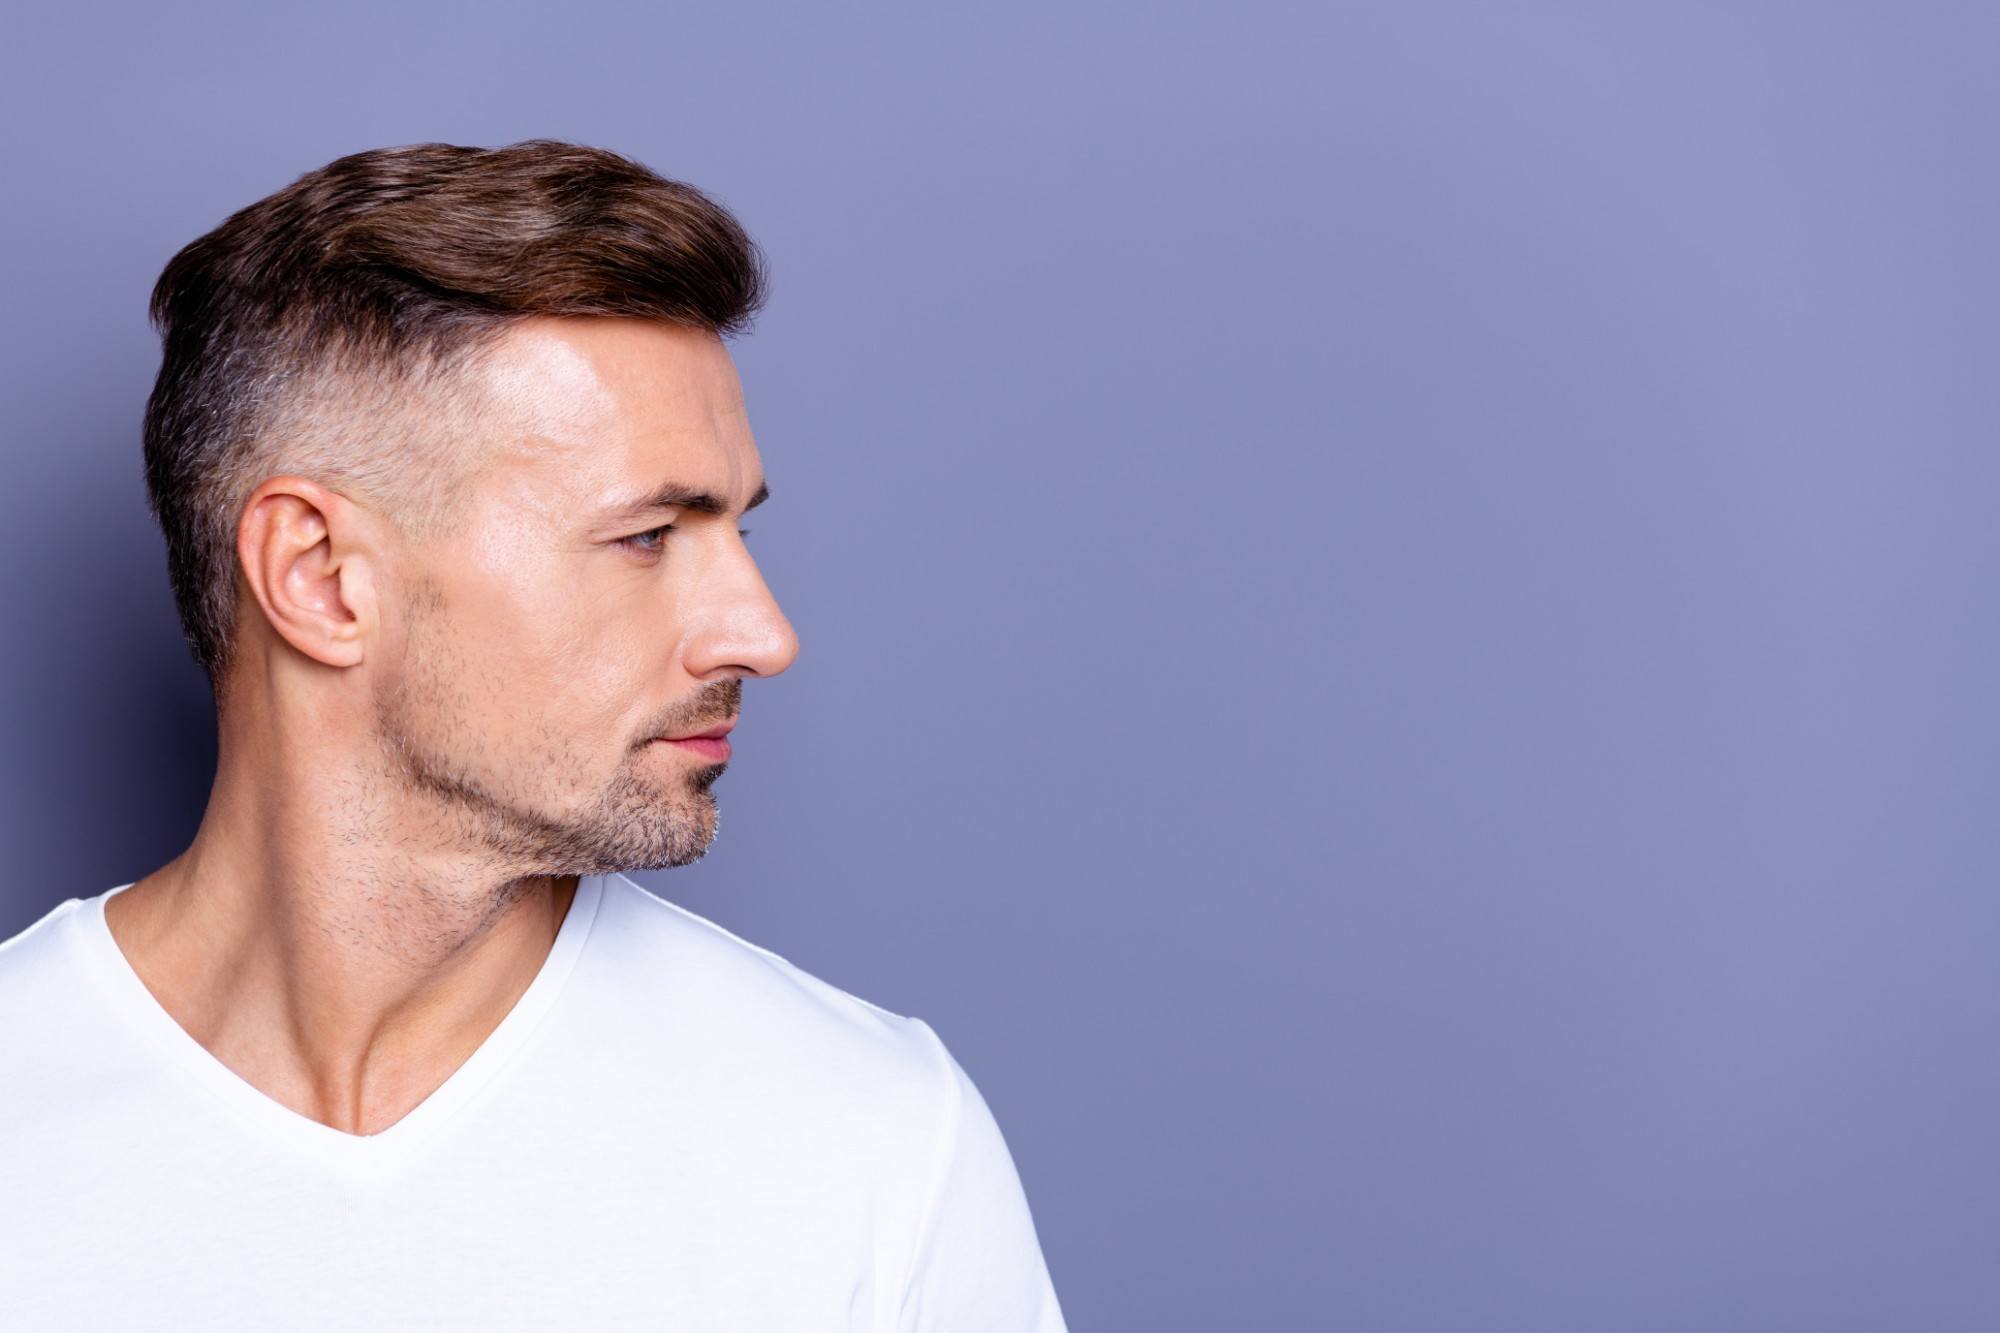 Short Haircuts For Men Don't Have To Be Boring In 2023